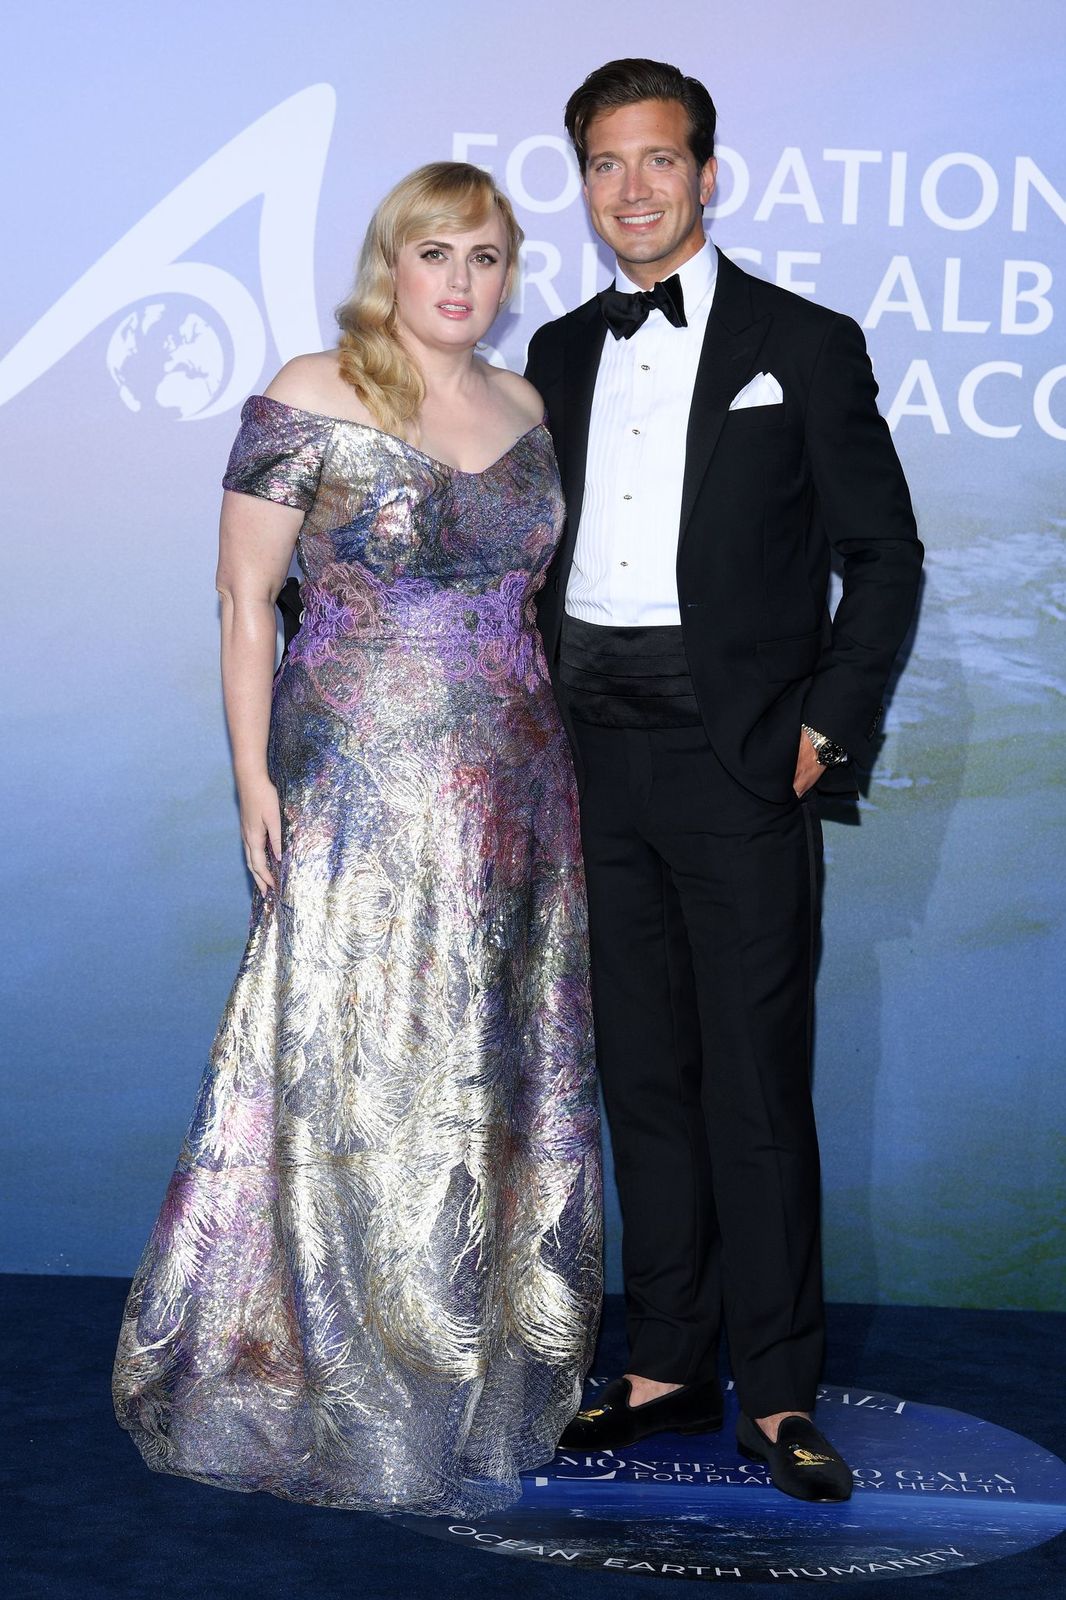 Rebel Wilson and Jacob Busch at the Monte-Carlo Gala For Planetary Health on September 24, 2020 | Photo: Getty Images